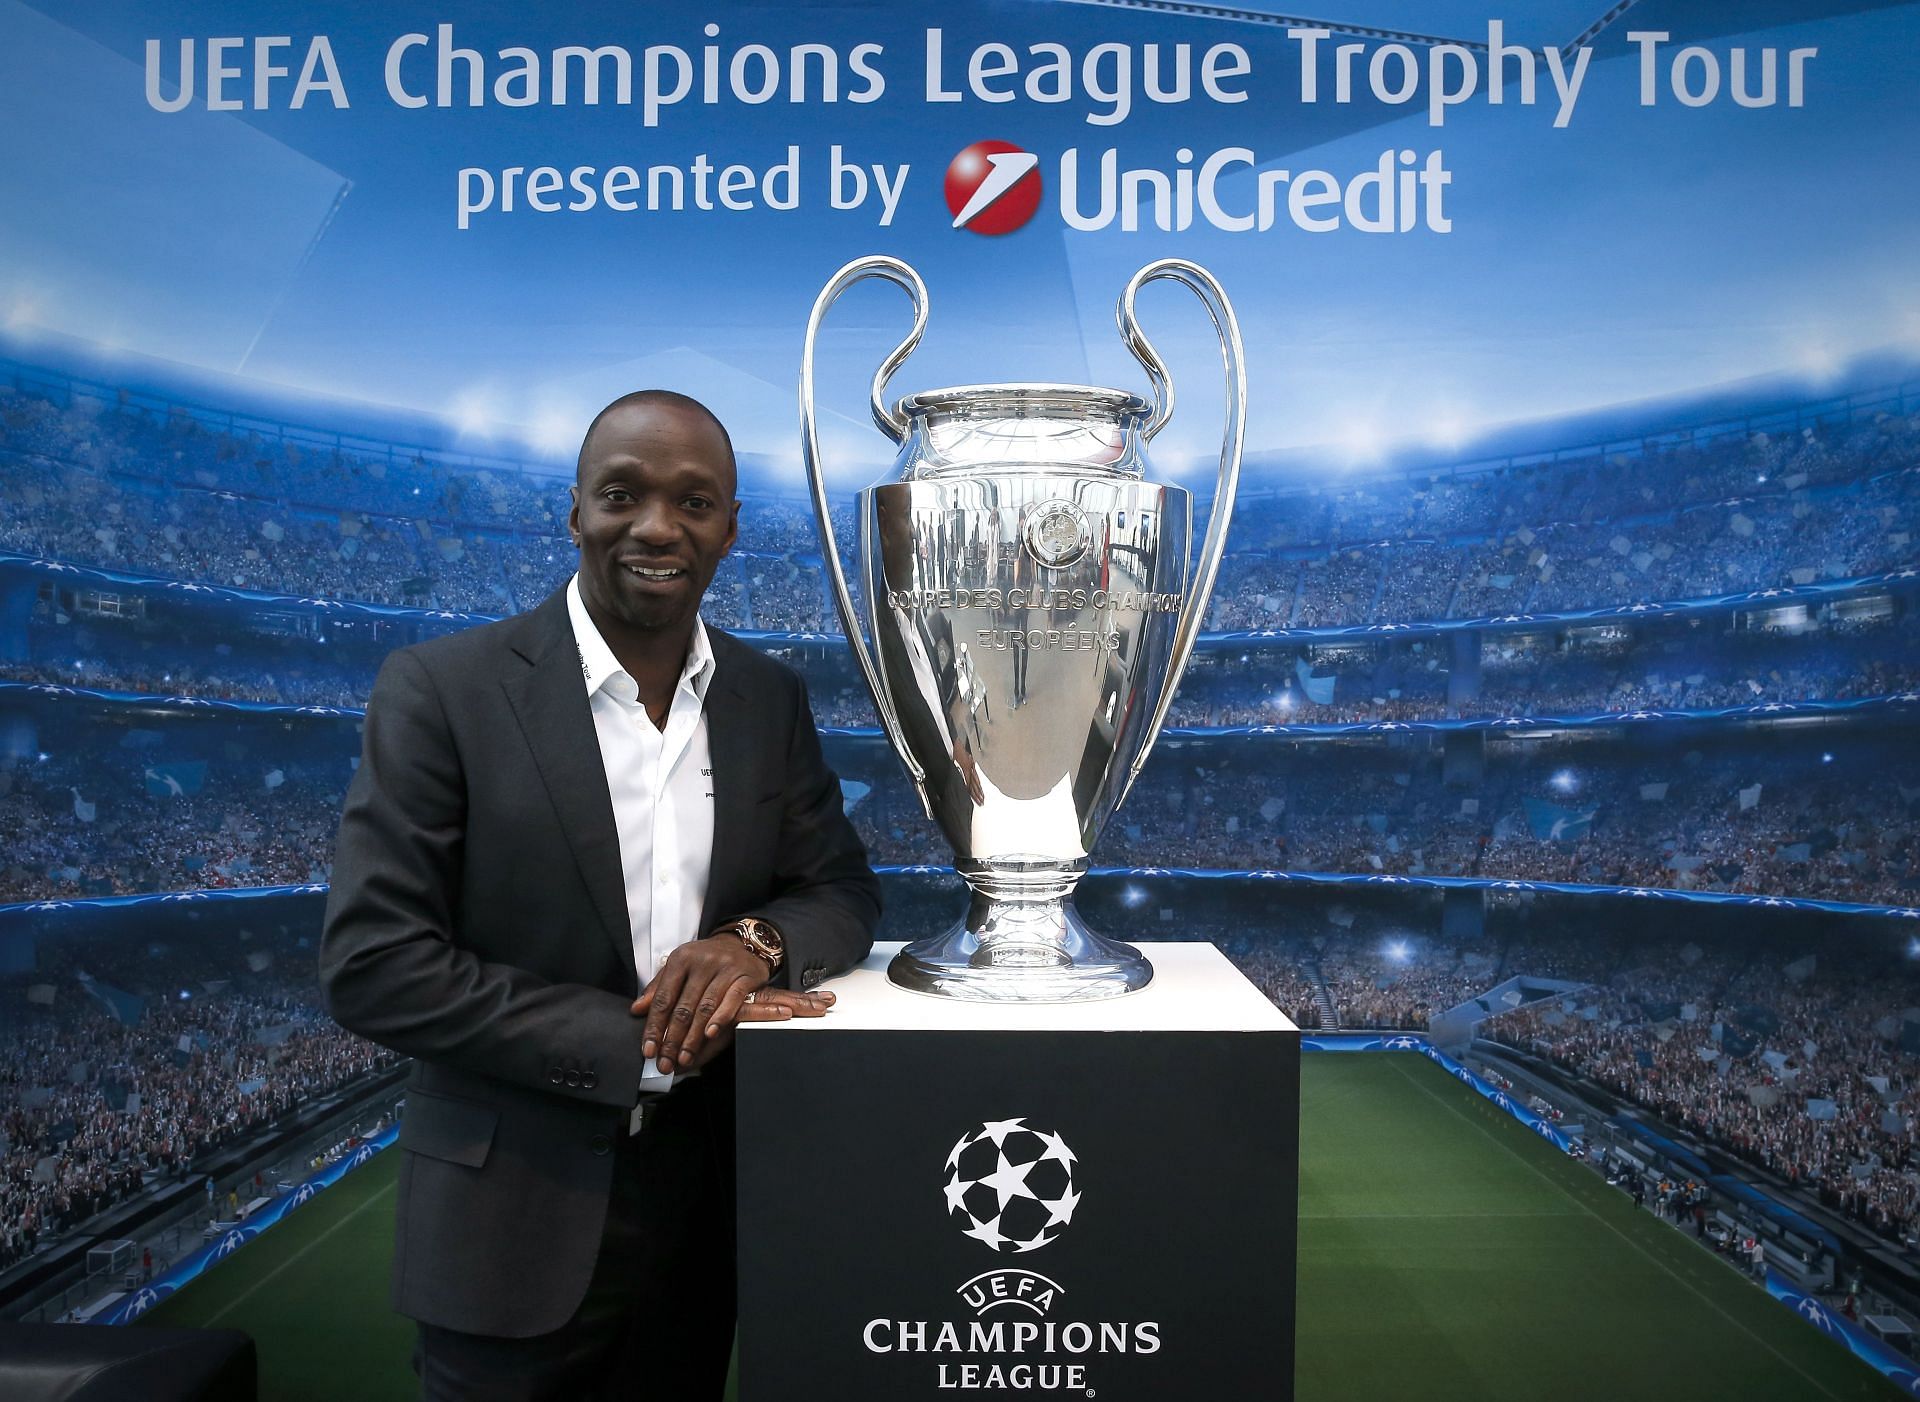 Makelele won the Champions League with Real Madrid.